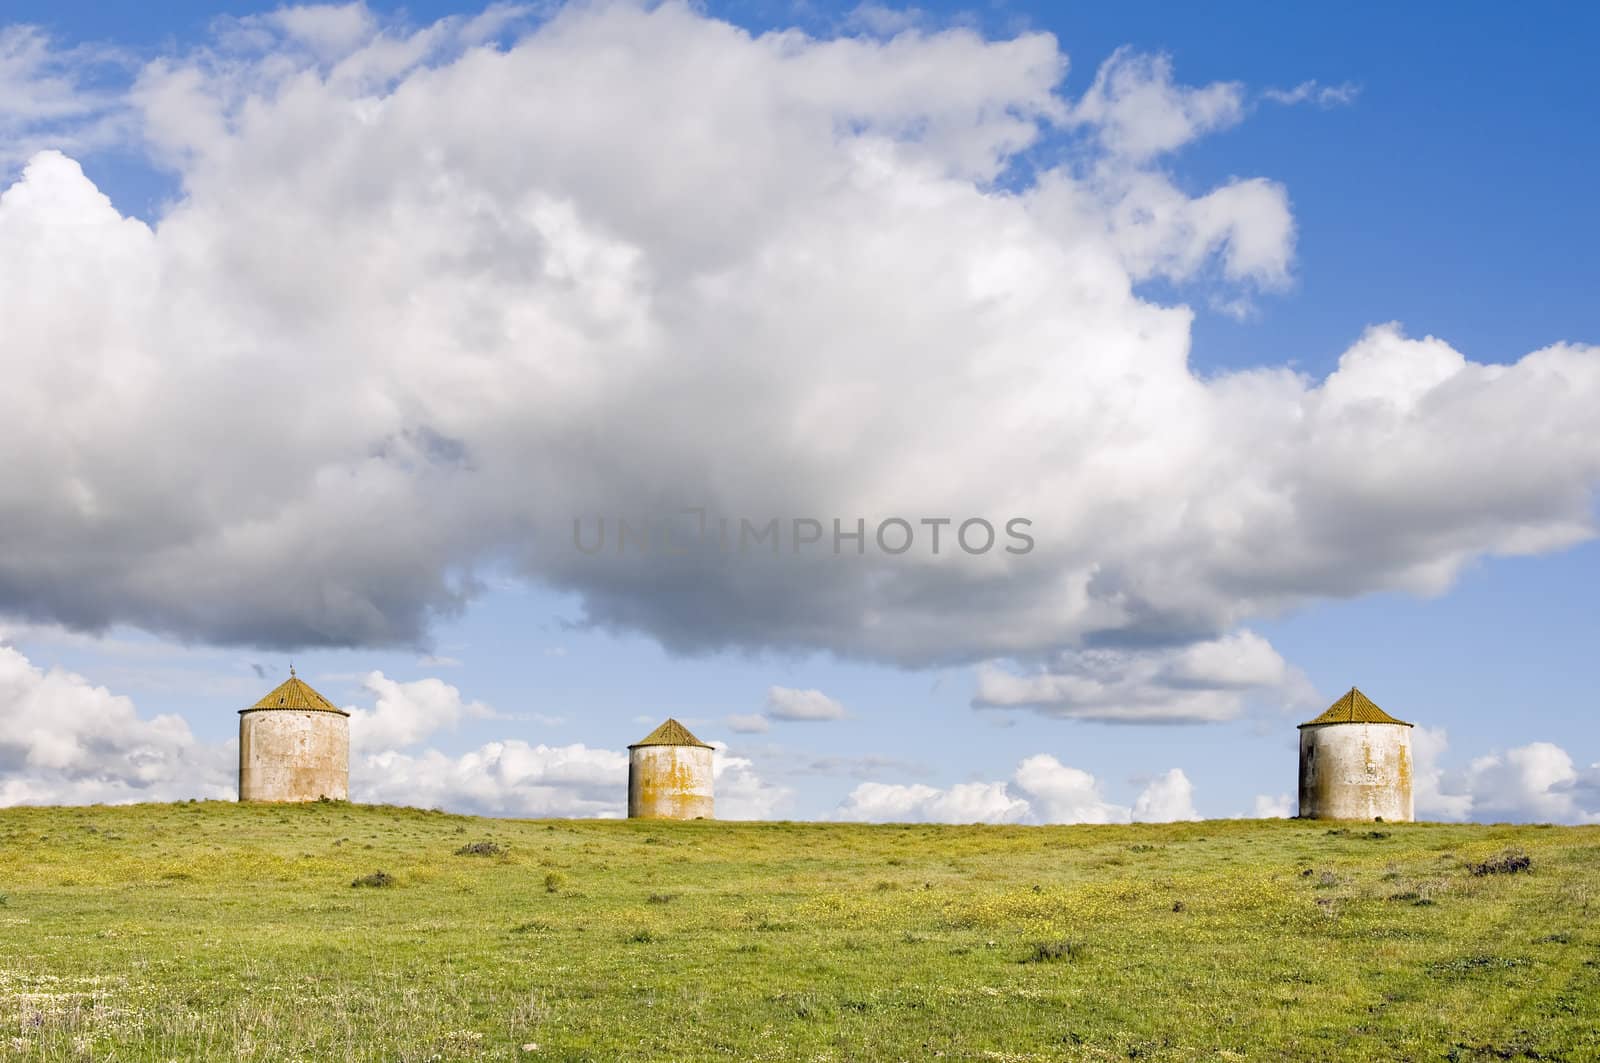 Three traditional agriculture silos in a field of yellow flowers, Alentejo, Portugal